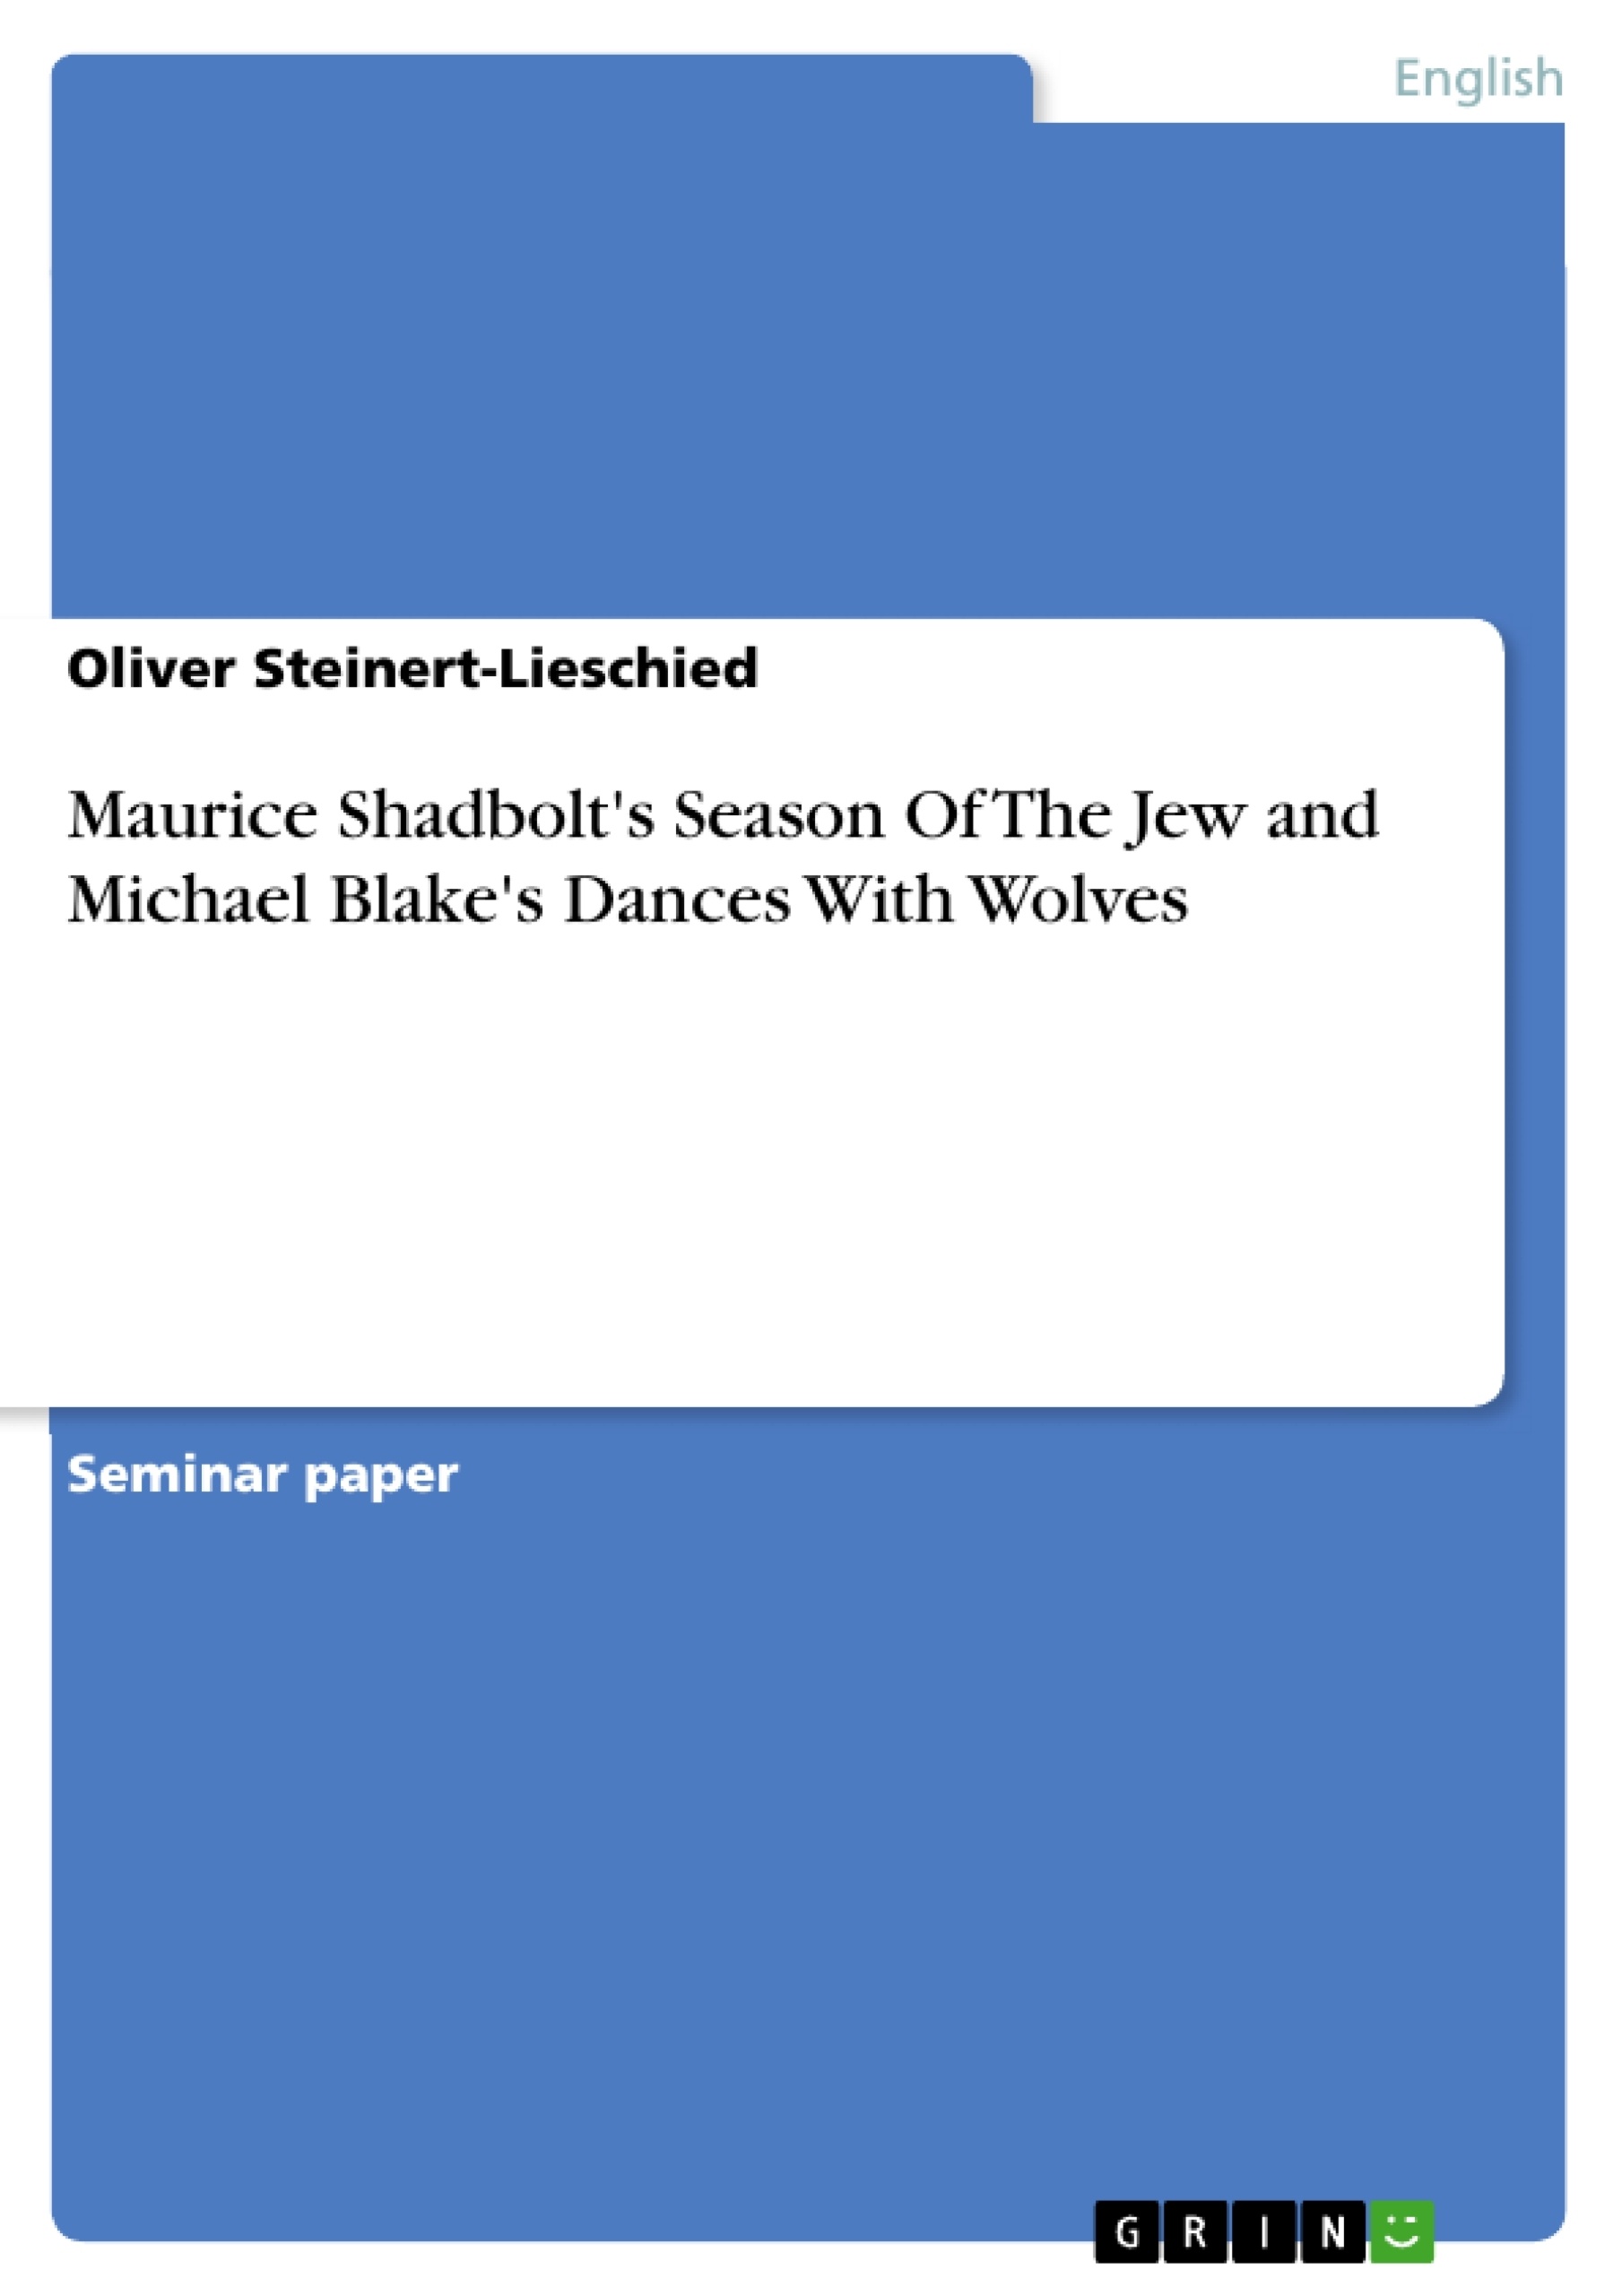 Title: Maurice Shadbolt's Season Of The Jew and Michael Blake's Dances With Wolves